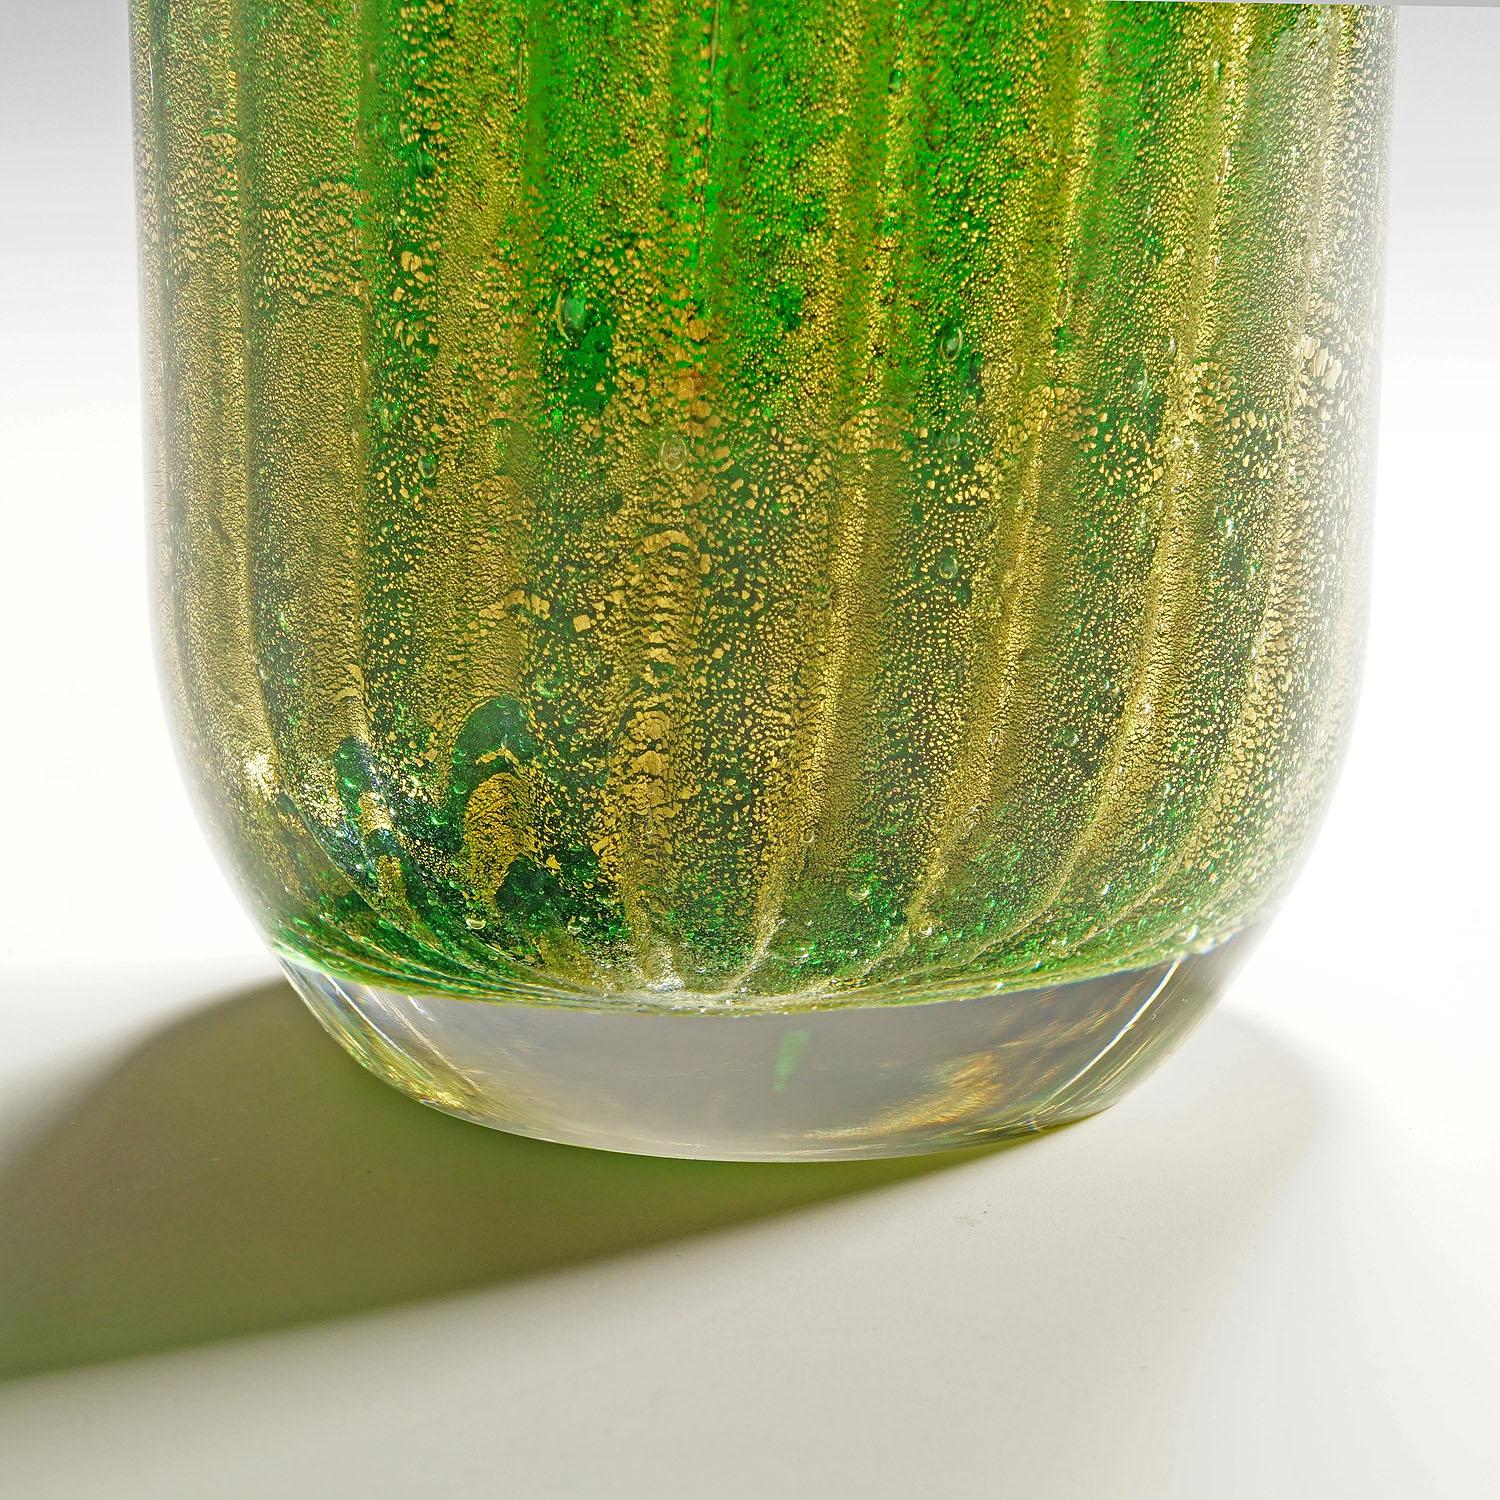 Hand-Crafted Large Vetro Sommerso Vase by Carlo Scarpa for Venini Murano, circa 1930s For Sale